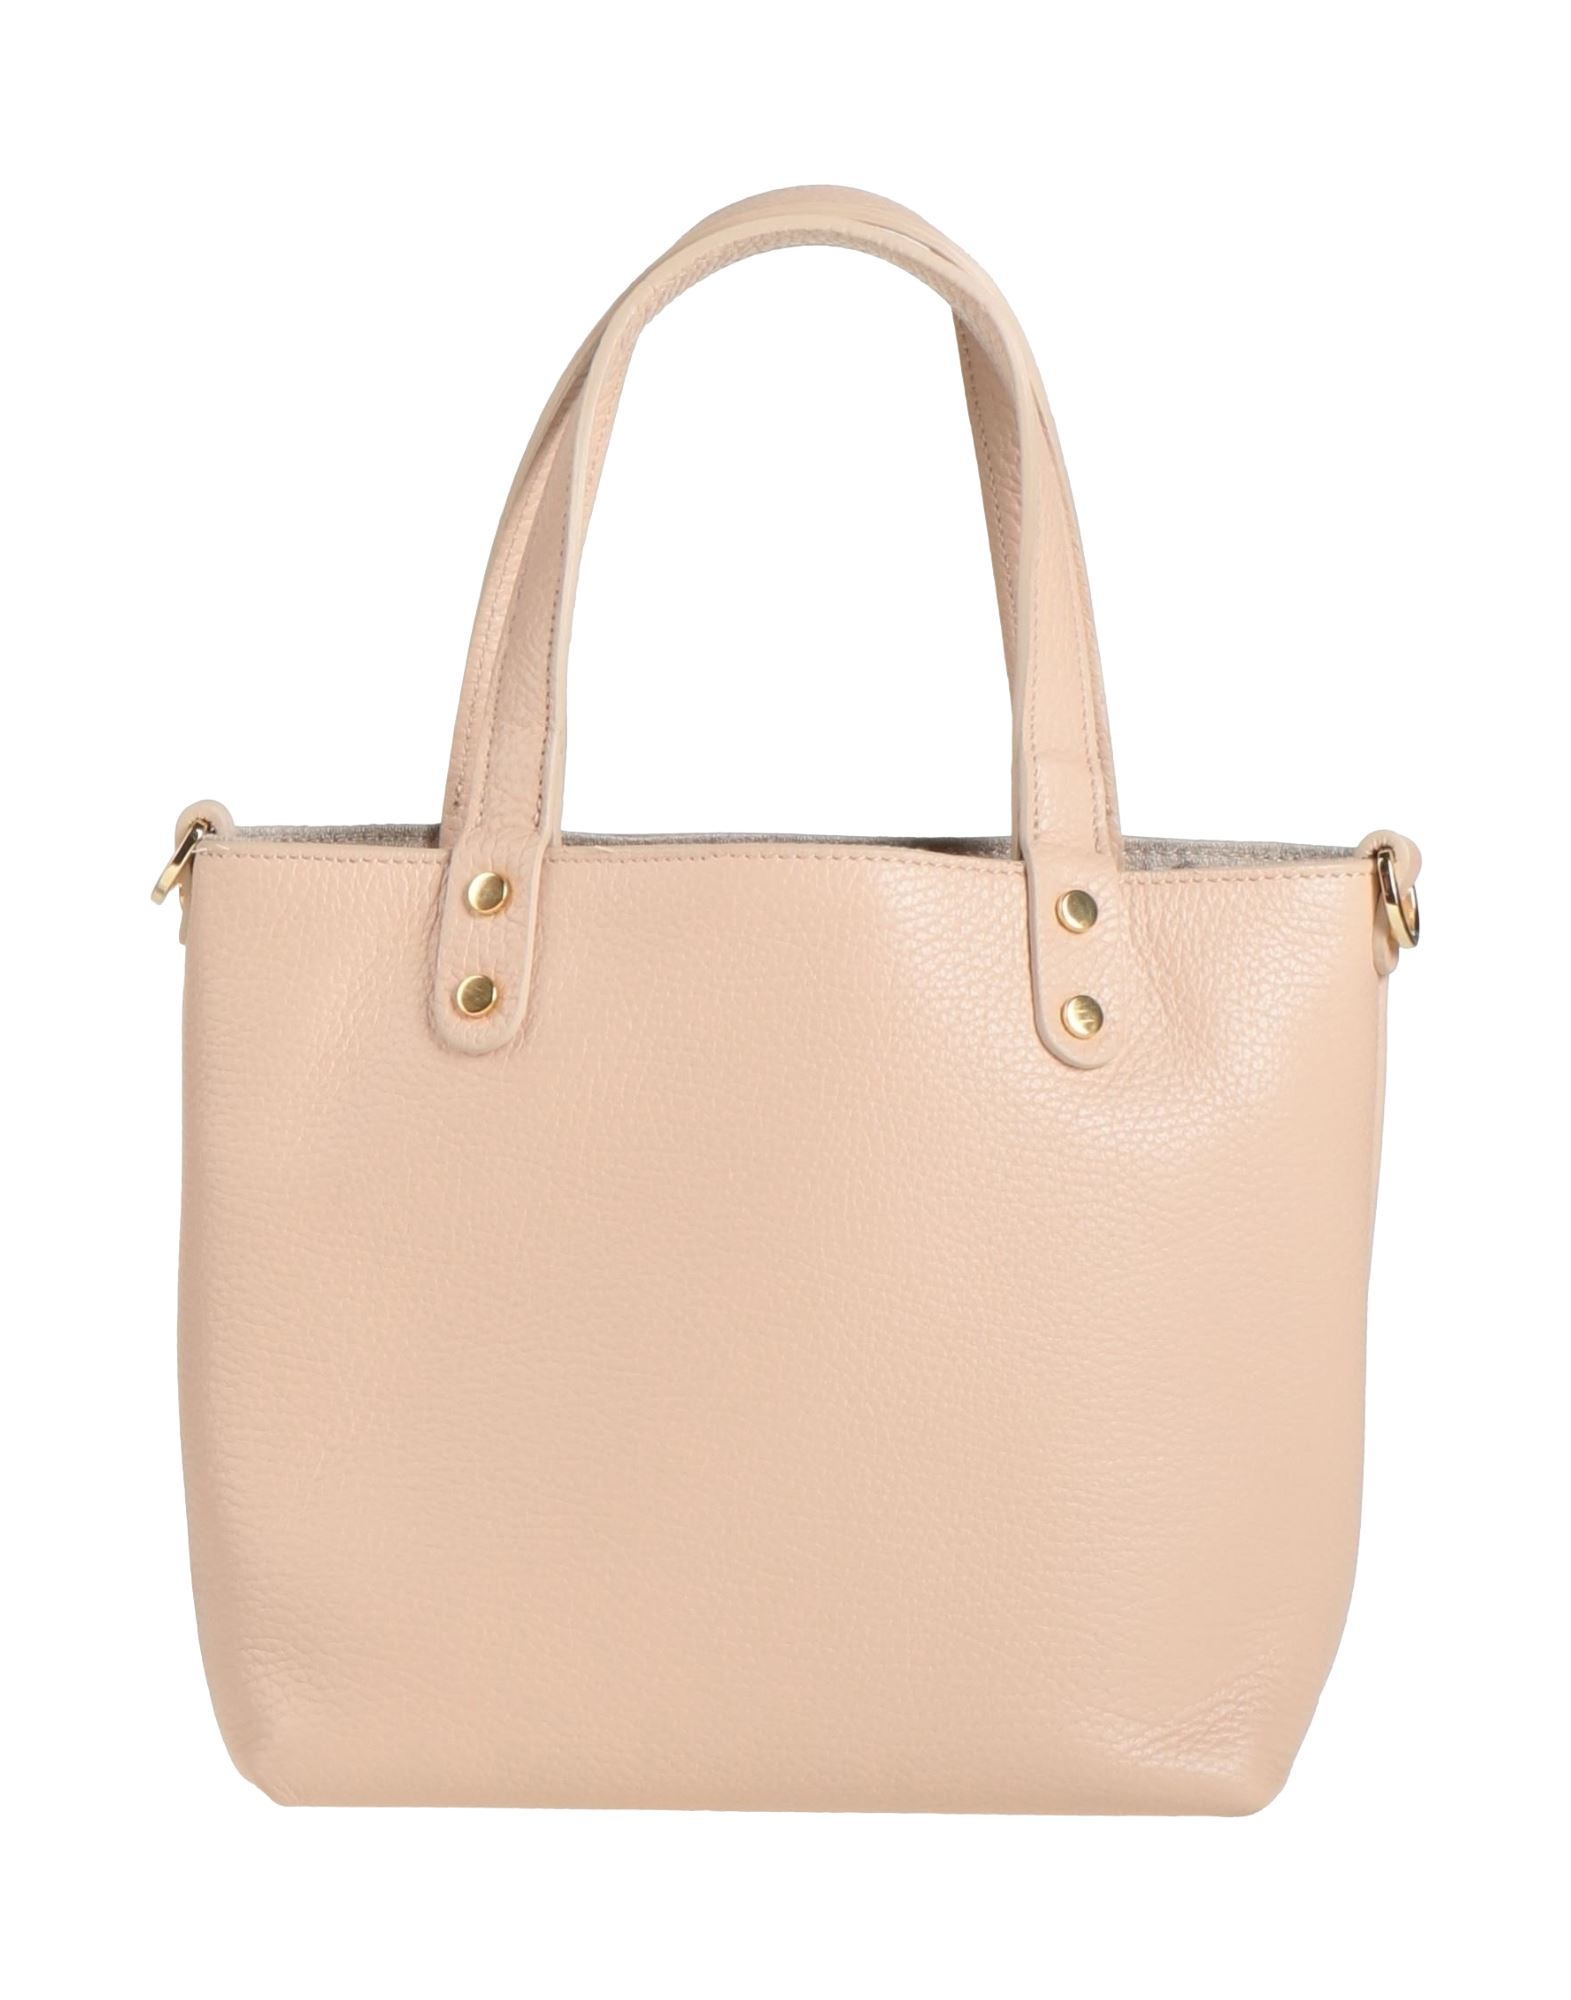 Innue' Woman Handbag Blush Size - Soft Leather In Pink